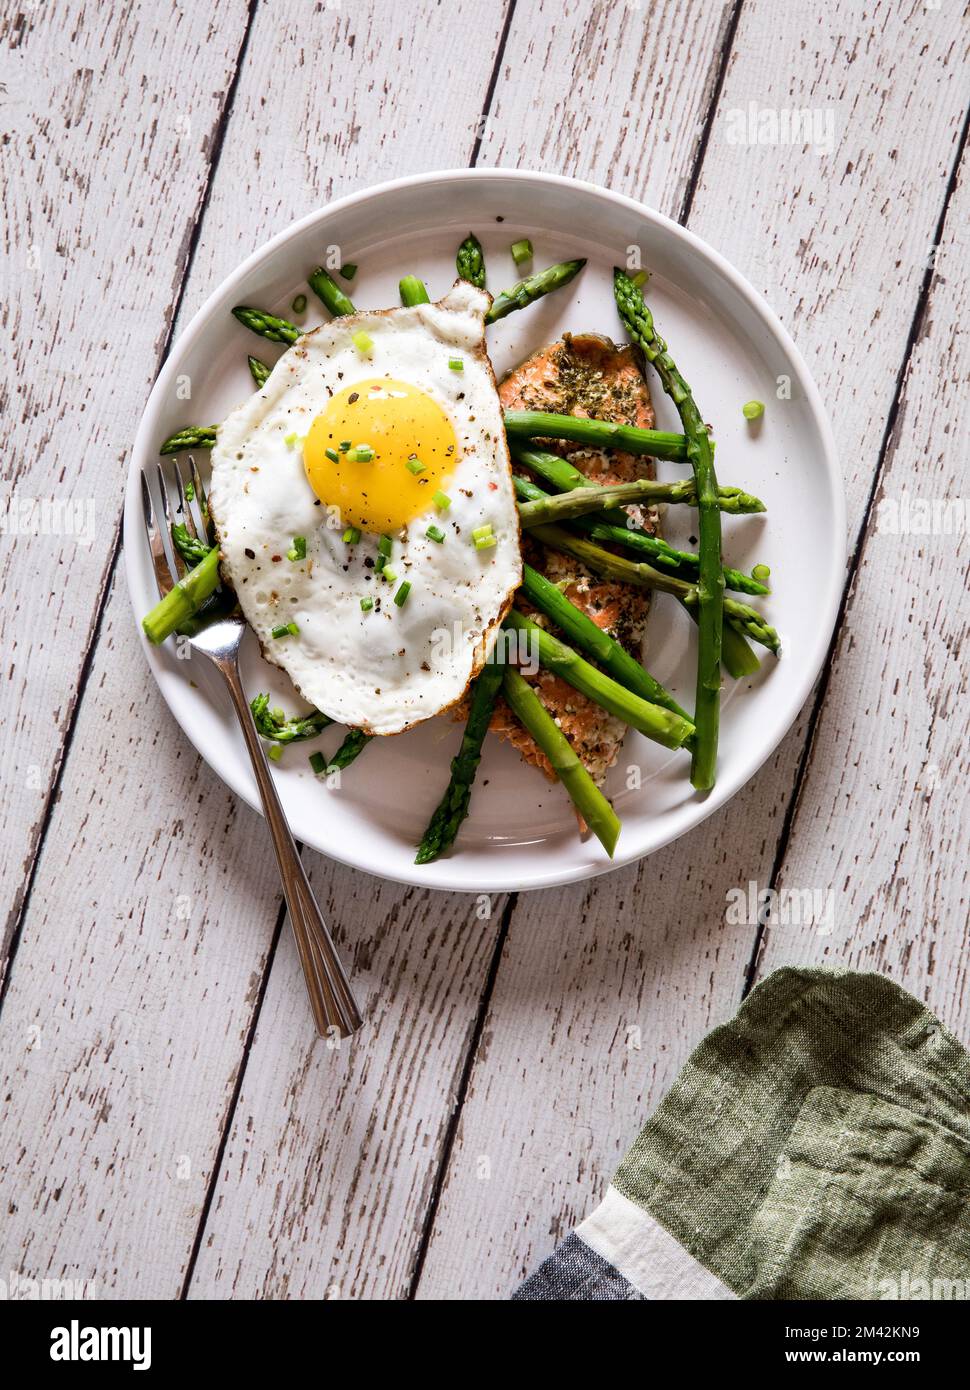 A plate of roasted salmon topped with steamed asparagus and a fried egg. Stock Photo